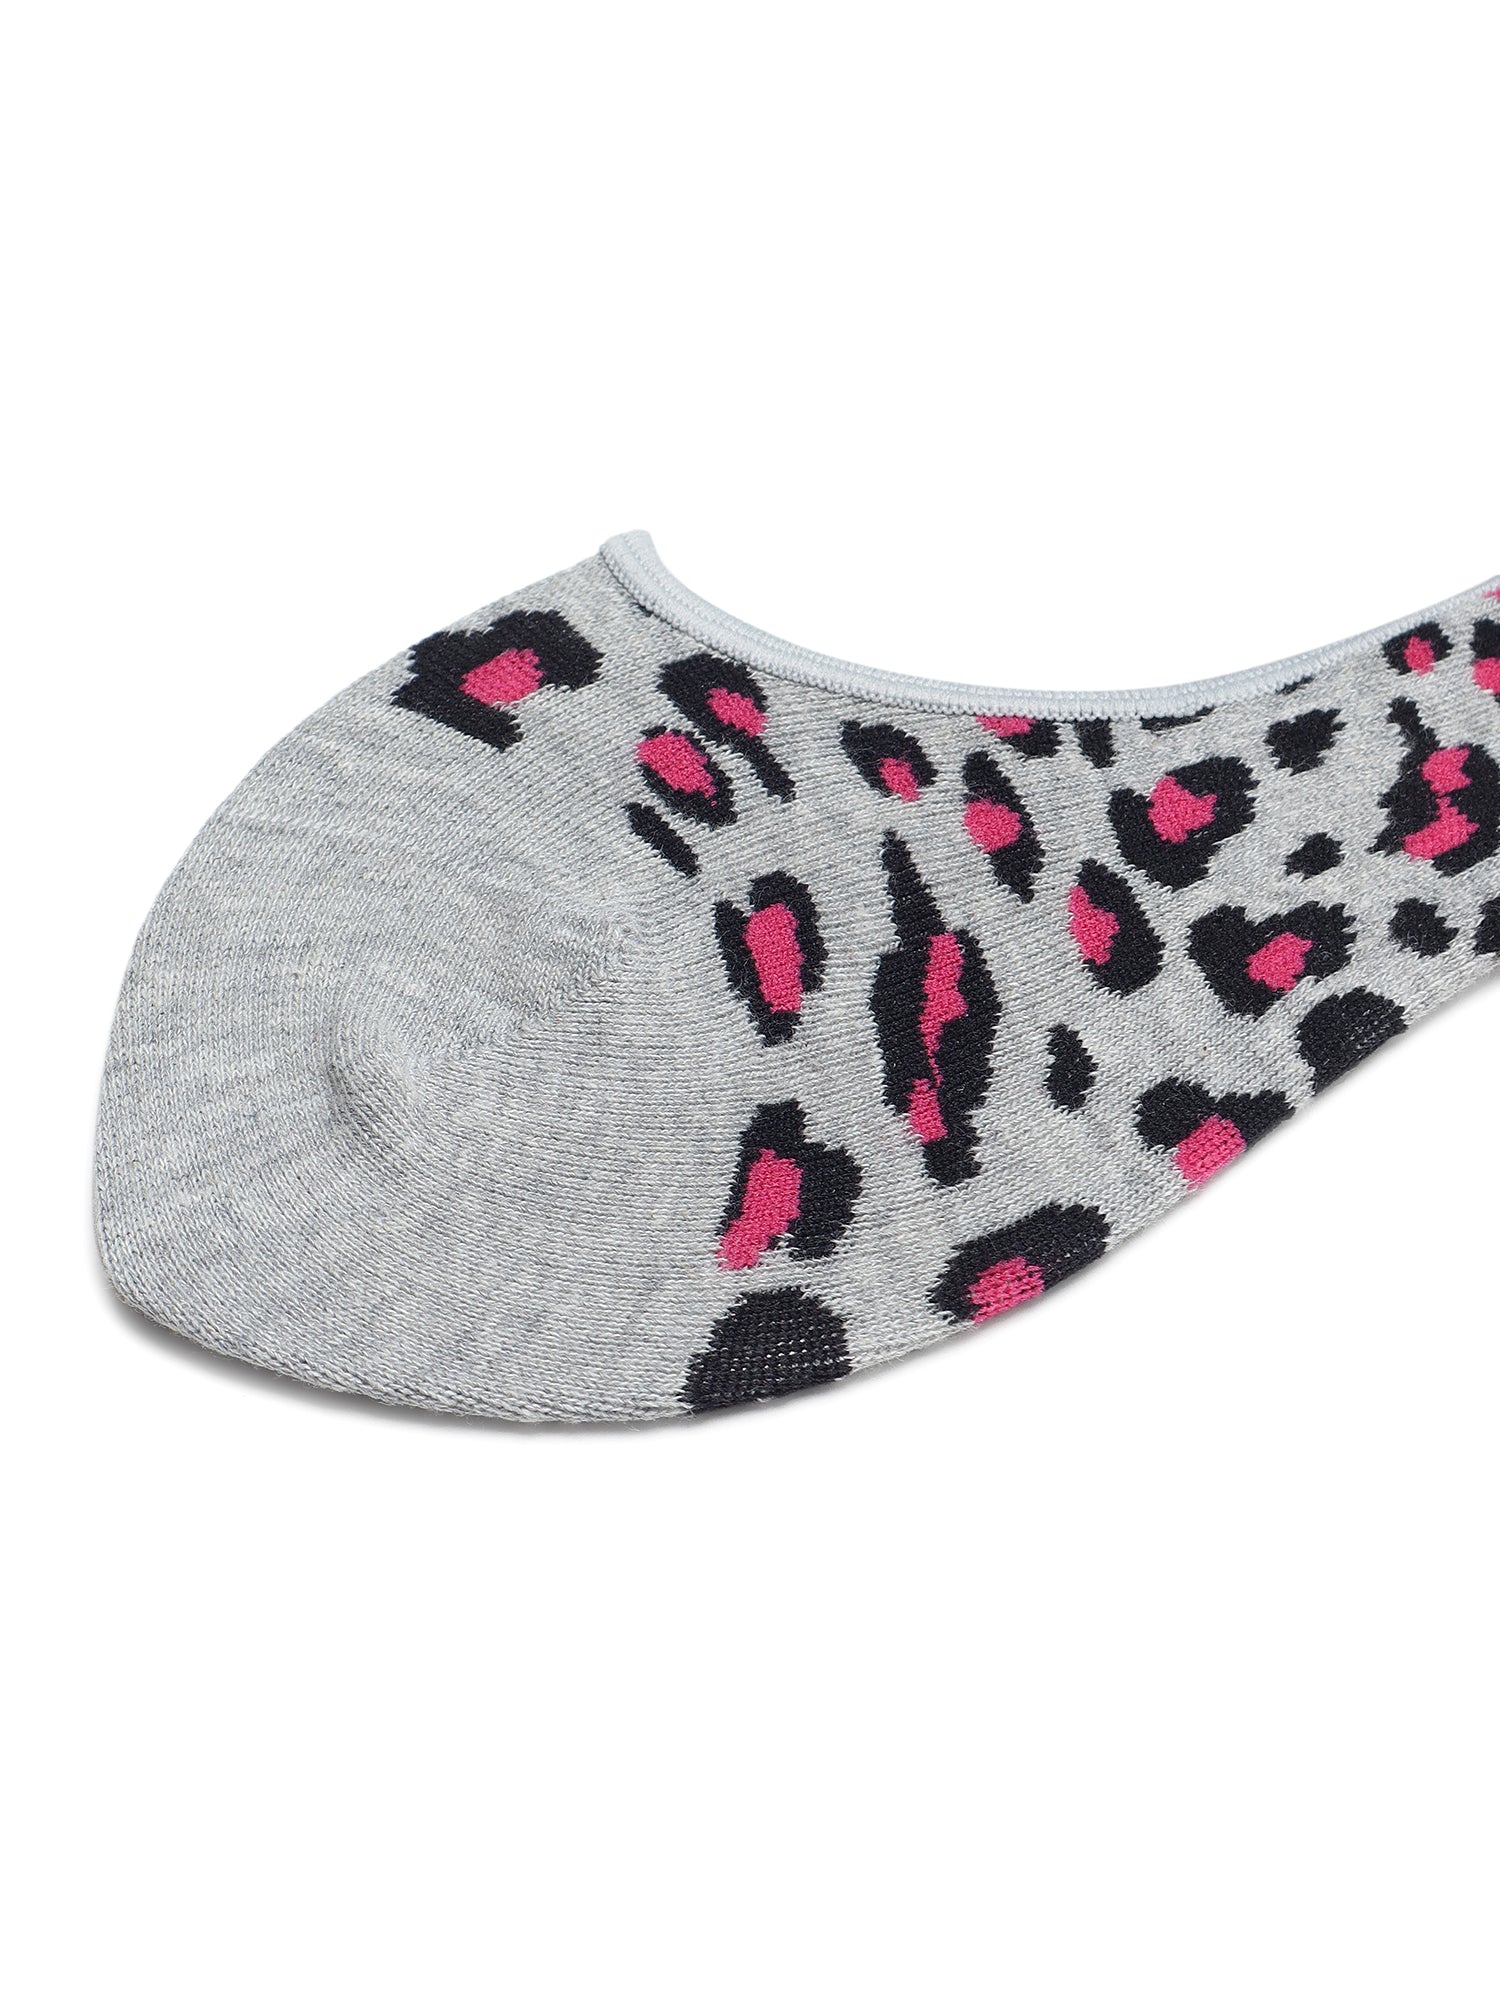 Change Your Spots | No Show Socks for Women